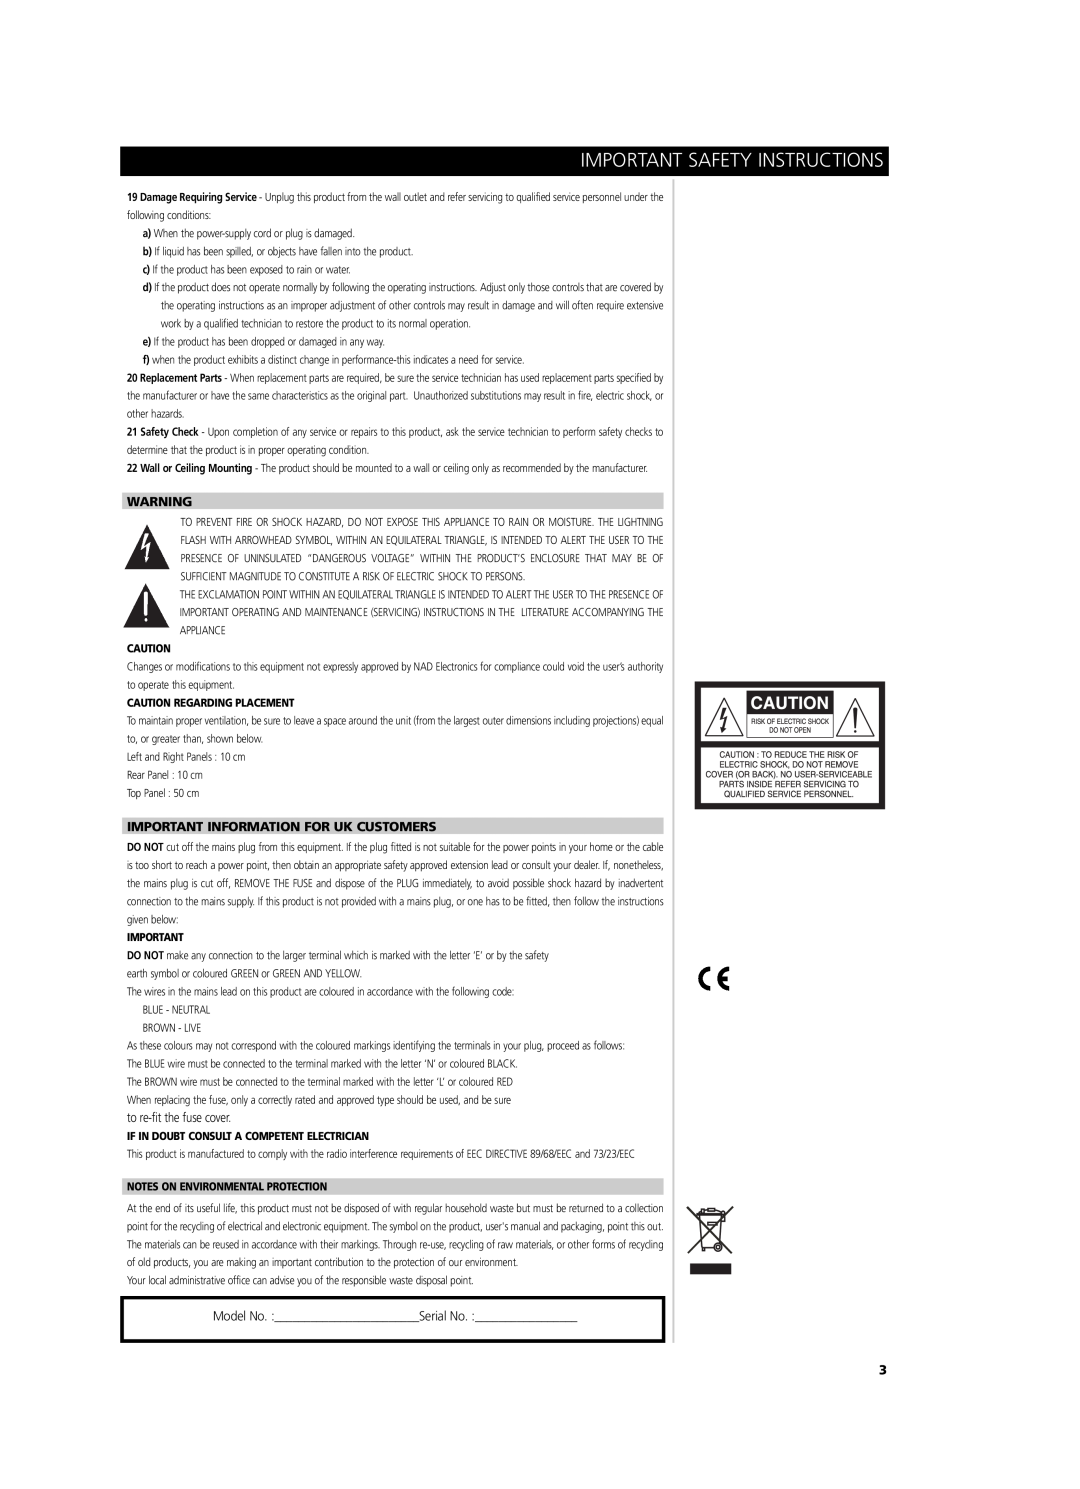 NAD T975 owner manual Important Information For Uk Customers, Important Safety Instructions, Caution Regarding Placement 